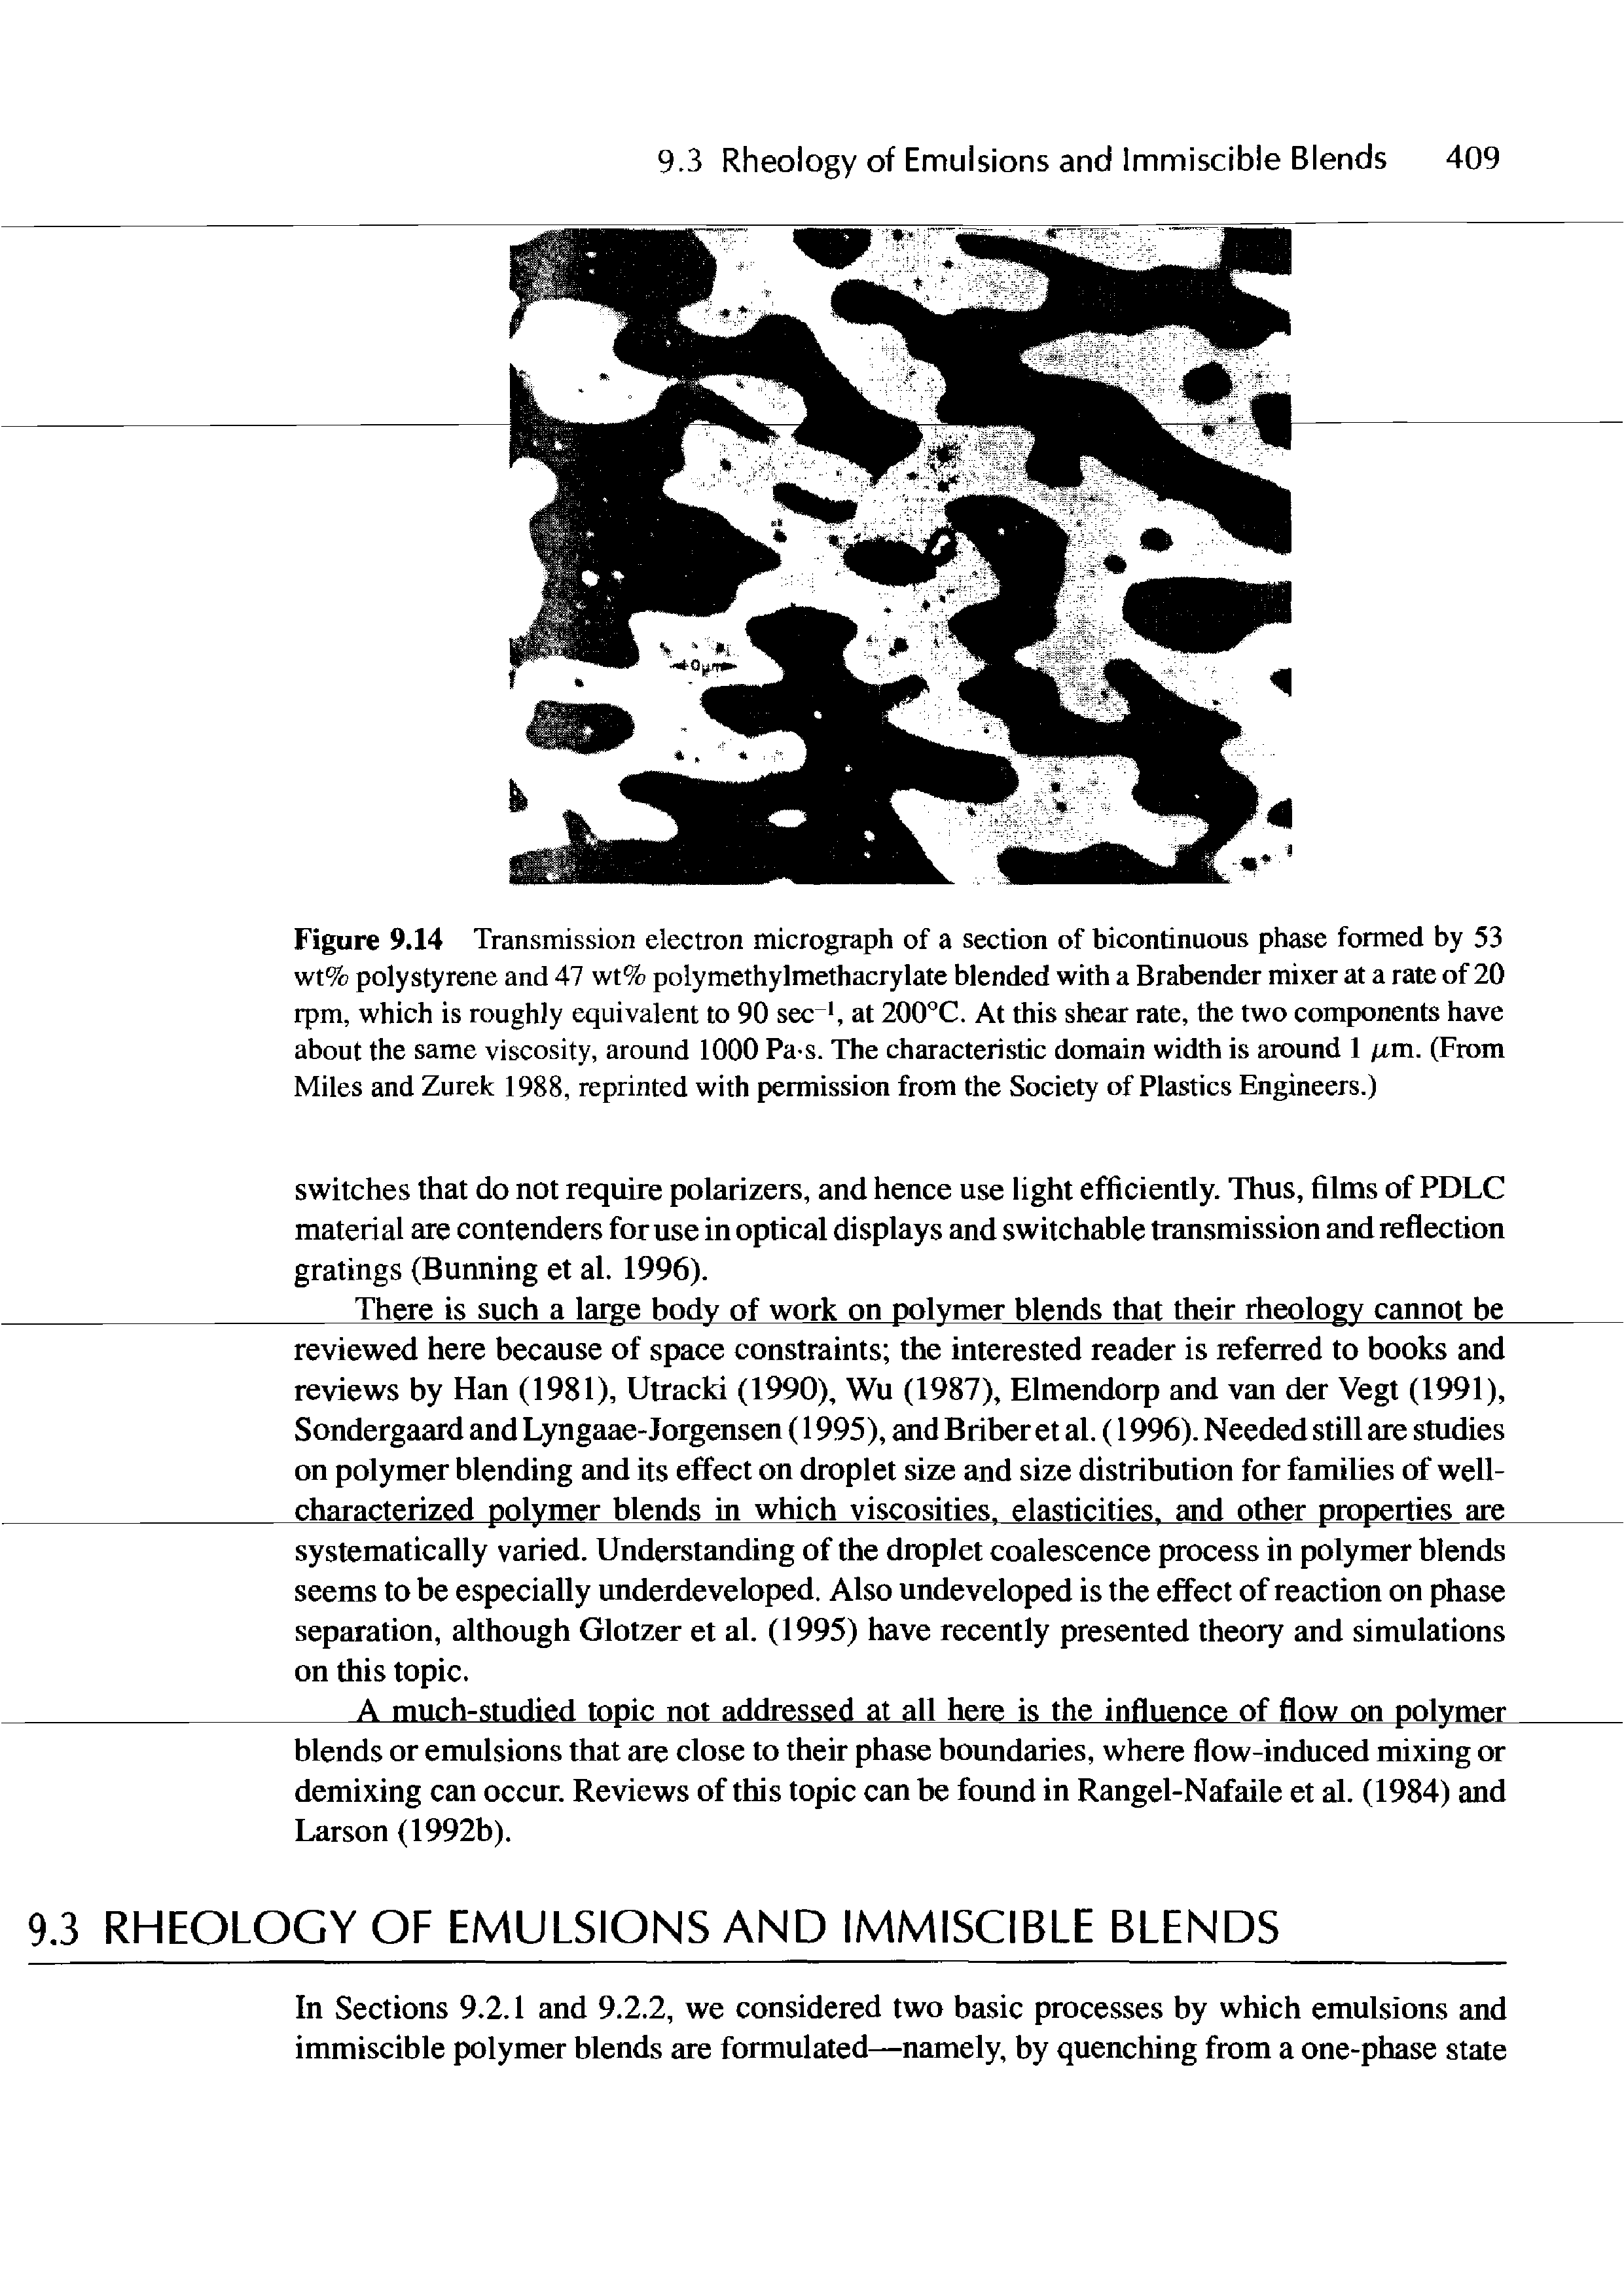 Figure 9.14 Transmission electron micrograph of a section of bicontinuous phase formed by 53 wt% polystyrene and 47 wt% polymethylmethacrylate blended with a Brabender mixer at a rate of 20 rpm, which is roughly equivalent to 90 sec, at 200°C. At this shear rate, the two components have about the same viscosity, around 1000 Pa s. The characteristic domain width is around 1 /xm. (From Miles and Zurek 1988, reprinted with permission from the Society of Plastics Engineers.)...